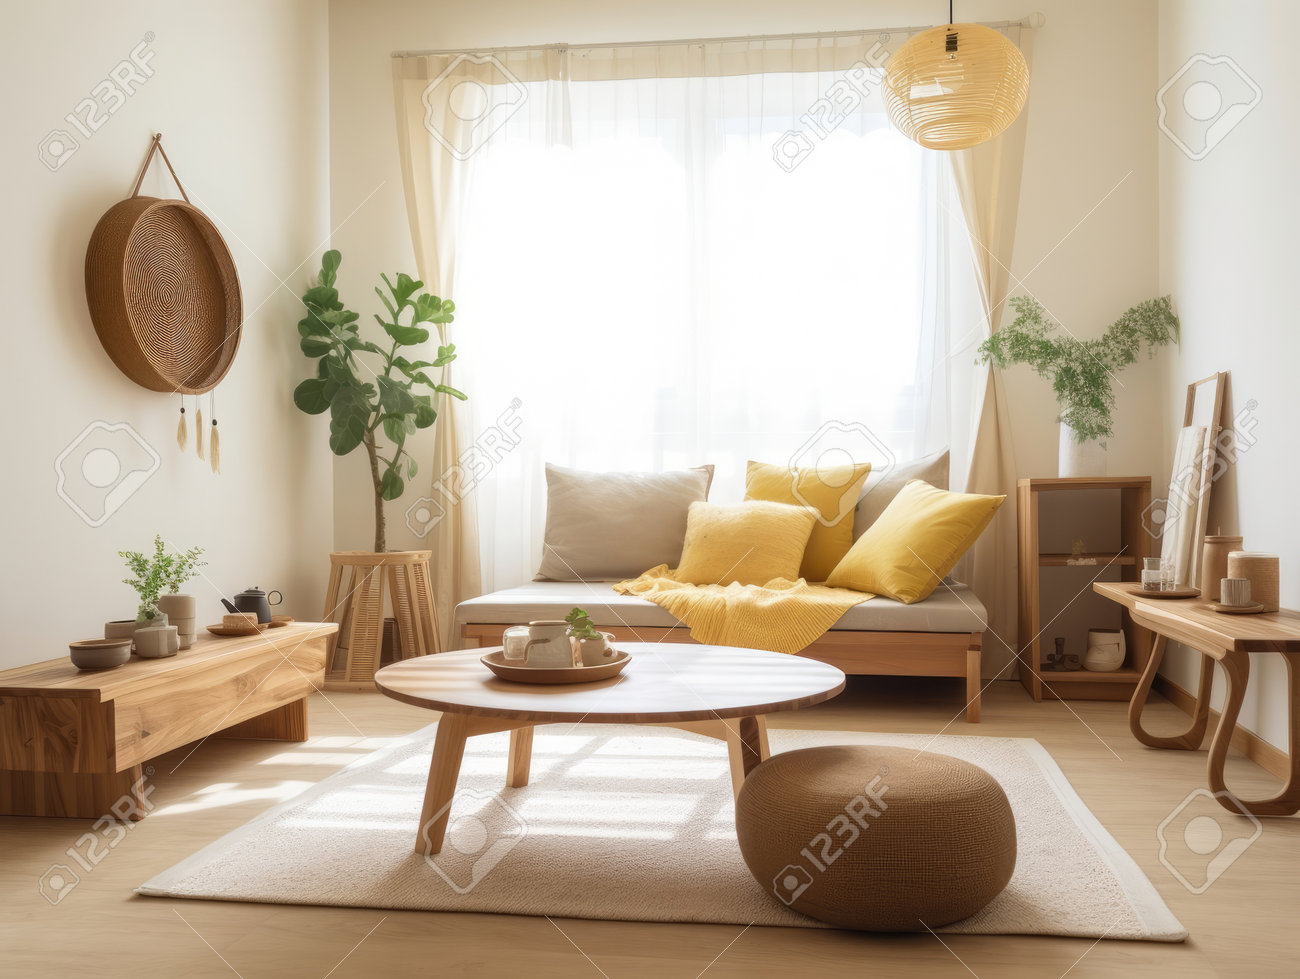 5 Tips to Make Your Home More Comfortable